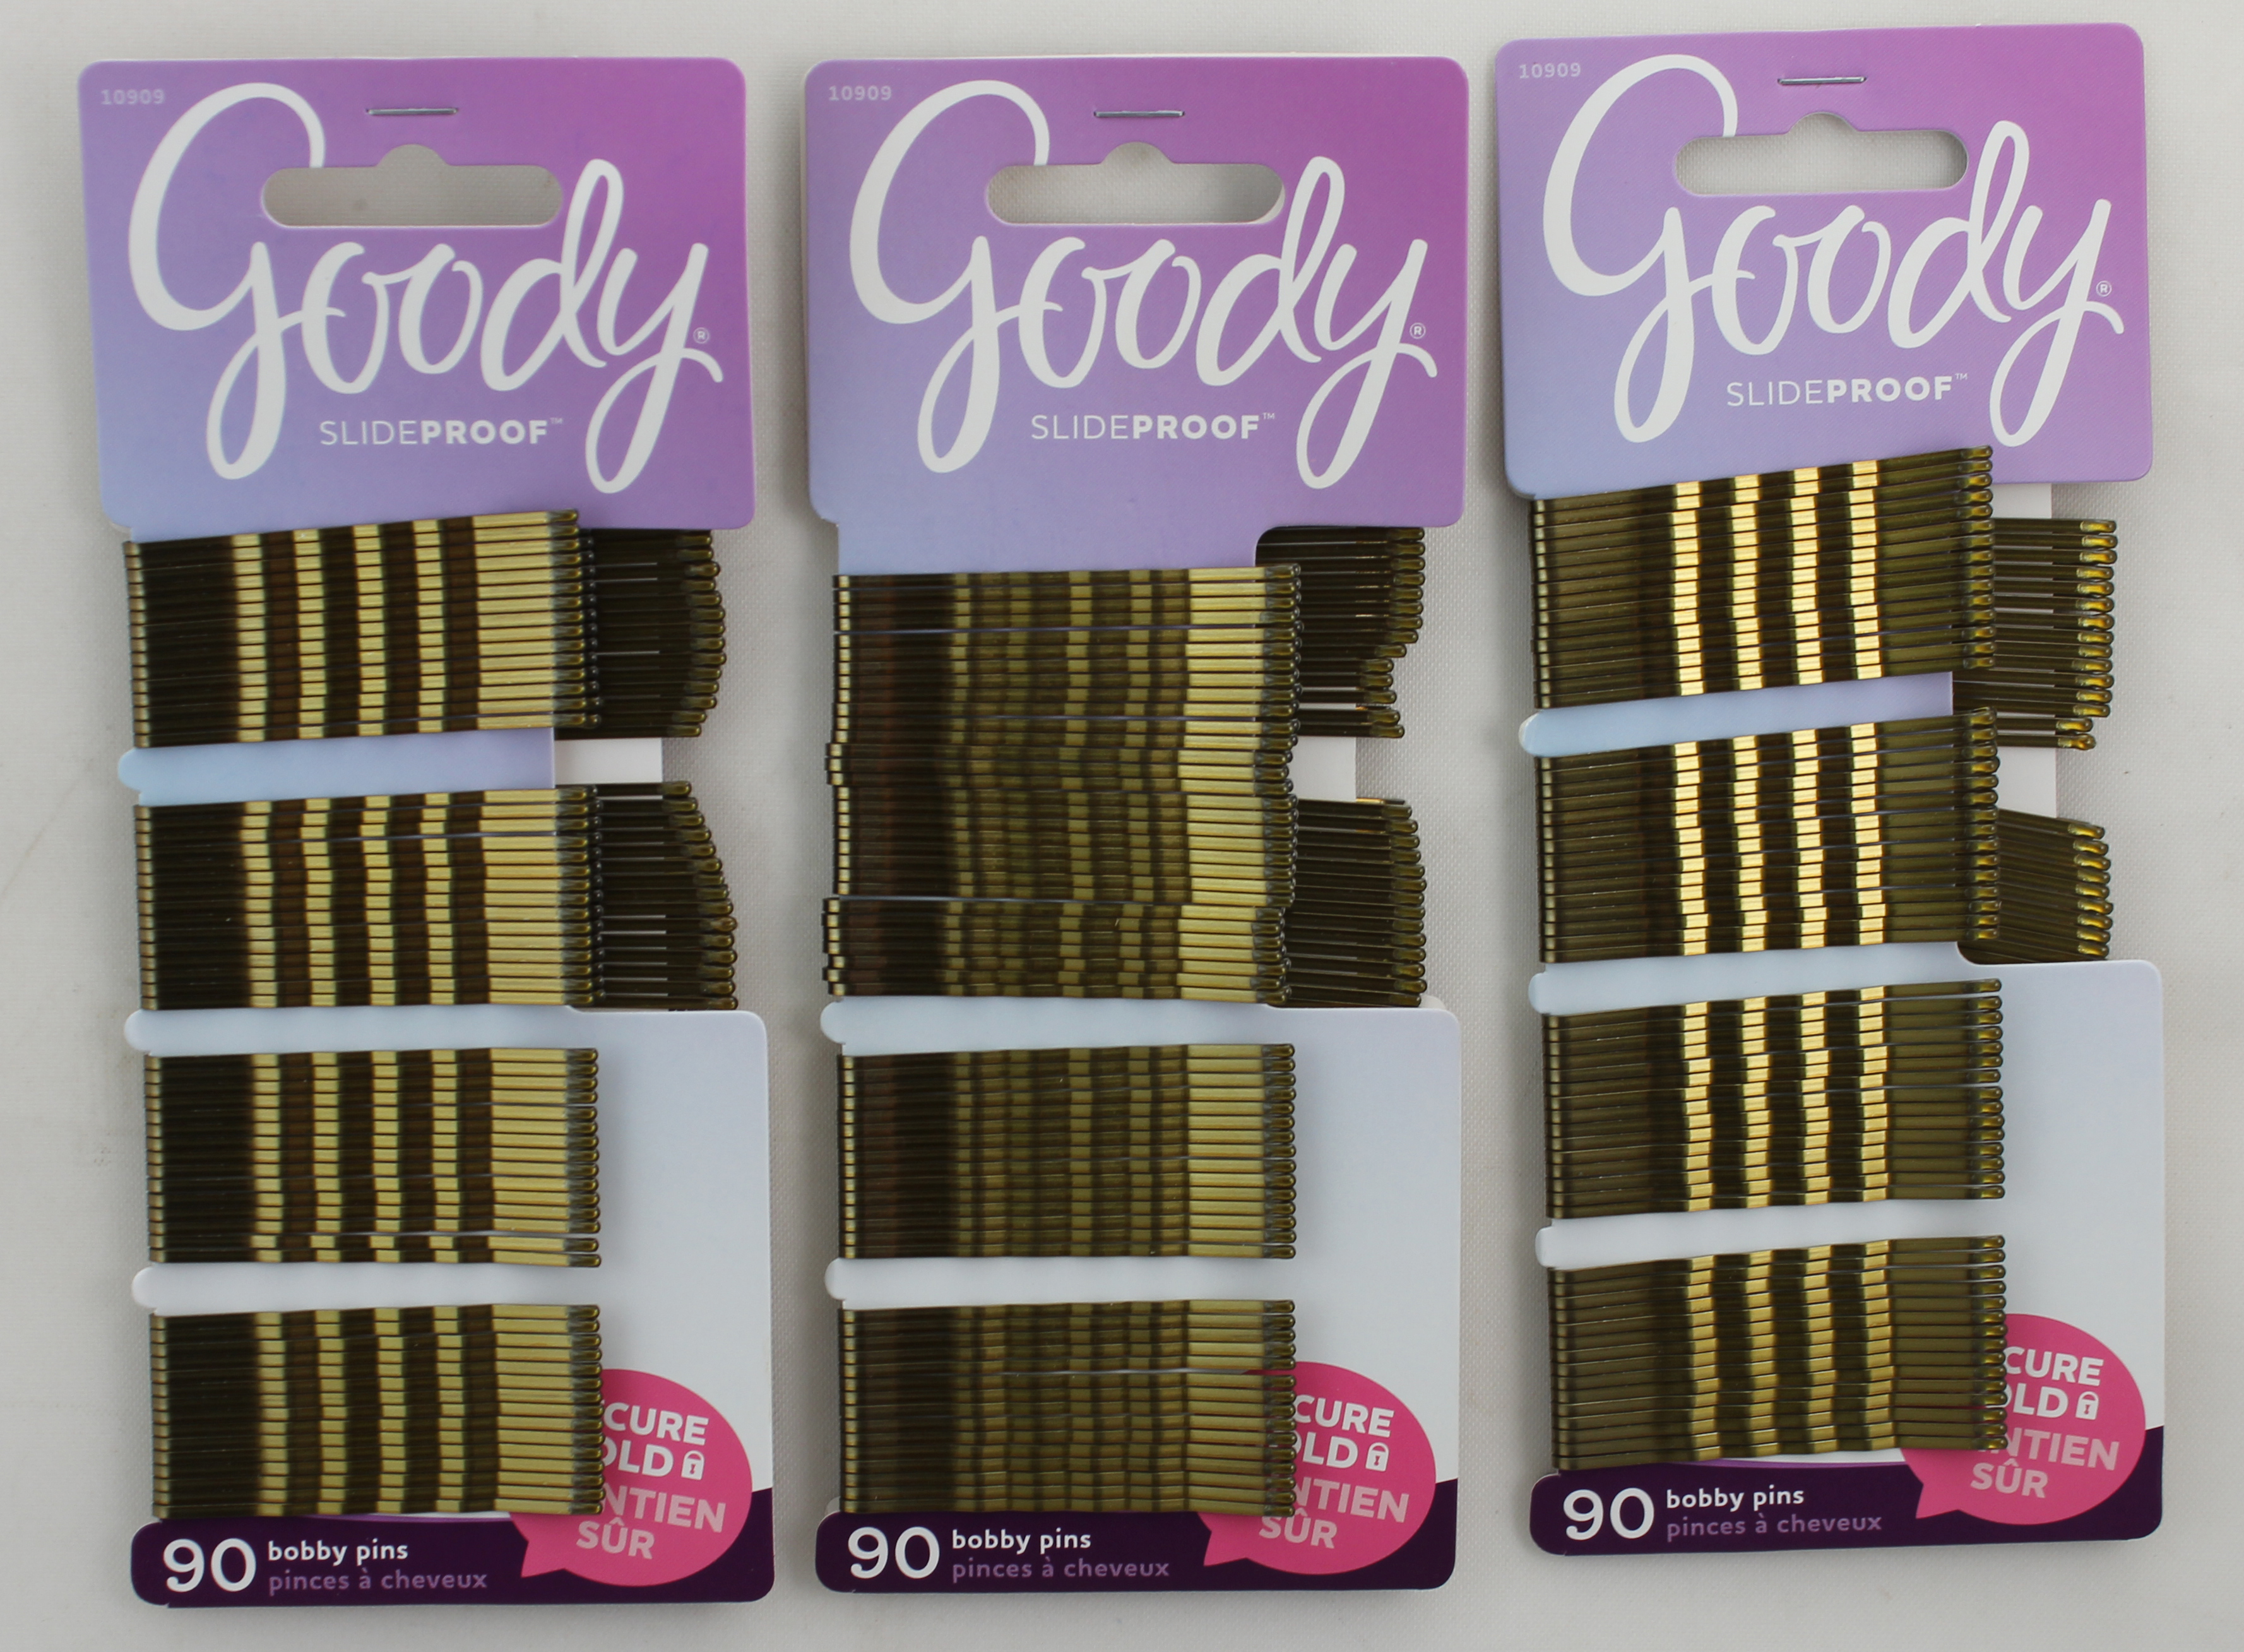 Goody Bobby Pins Slide Proof Blonde 90 CT - Click Image to Close